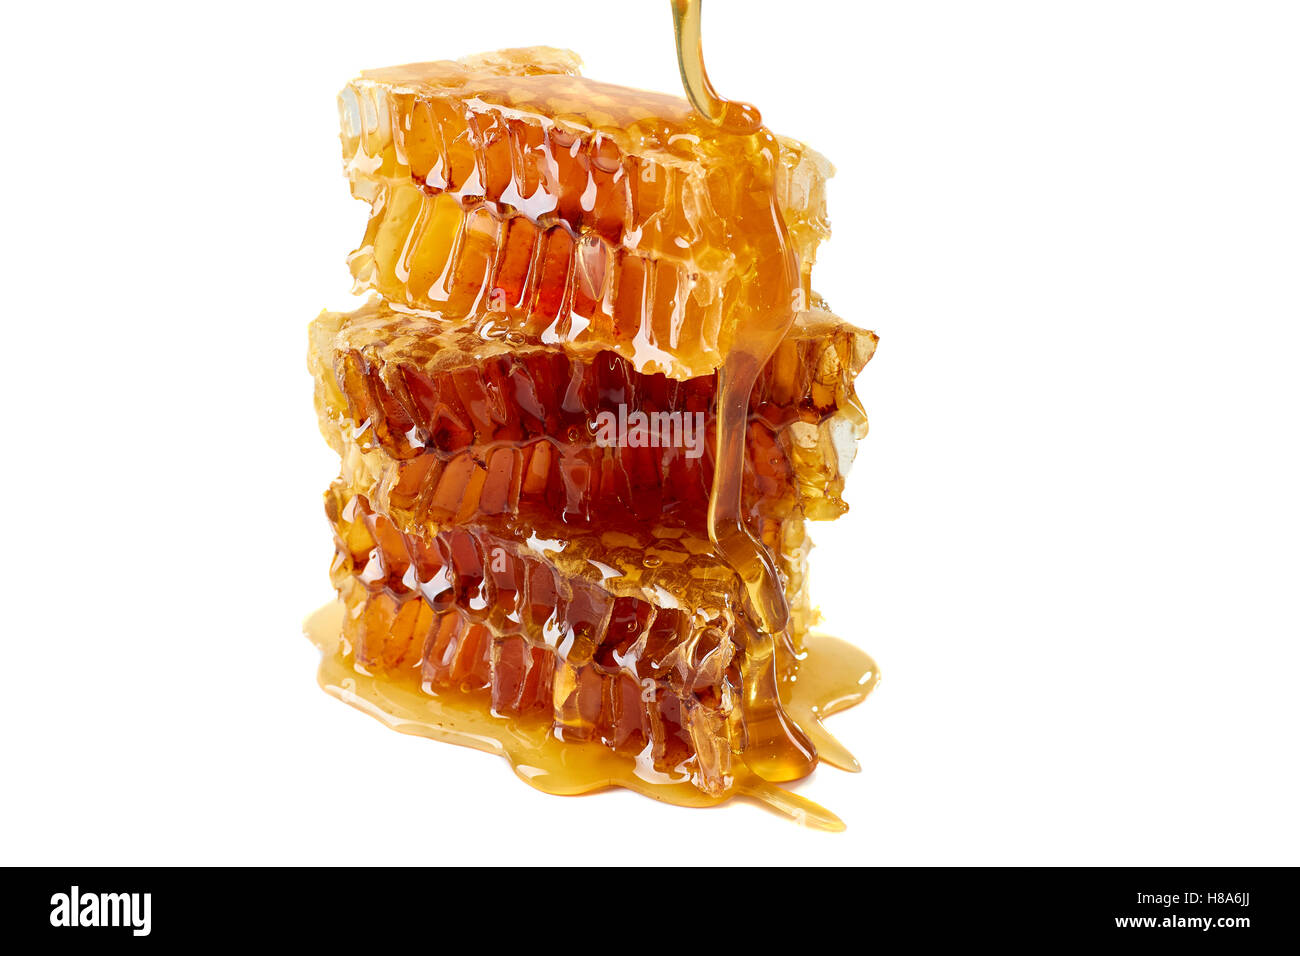 Dripping honey on honeycombs over white background Stock Photo